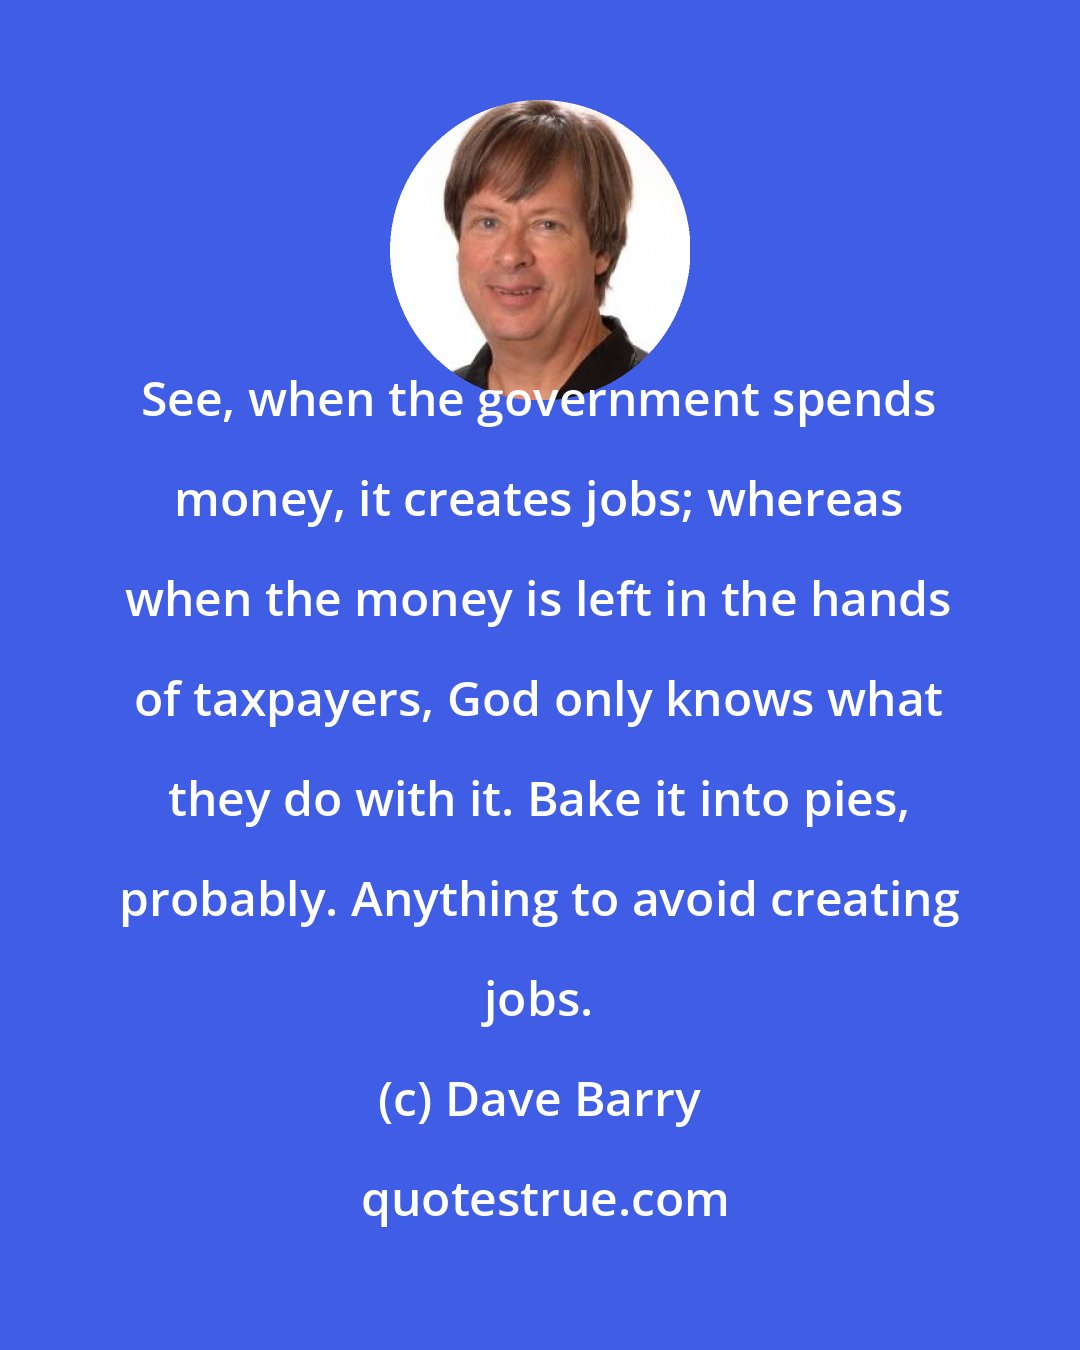 Dave Barry: See, when the government spends money, it creates jobs; whereas when the money is left in the hands of taxpayers, God only knows what they do with it. Bake it into pies, probably. Anything to avoid creating jobs.